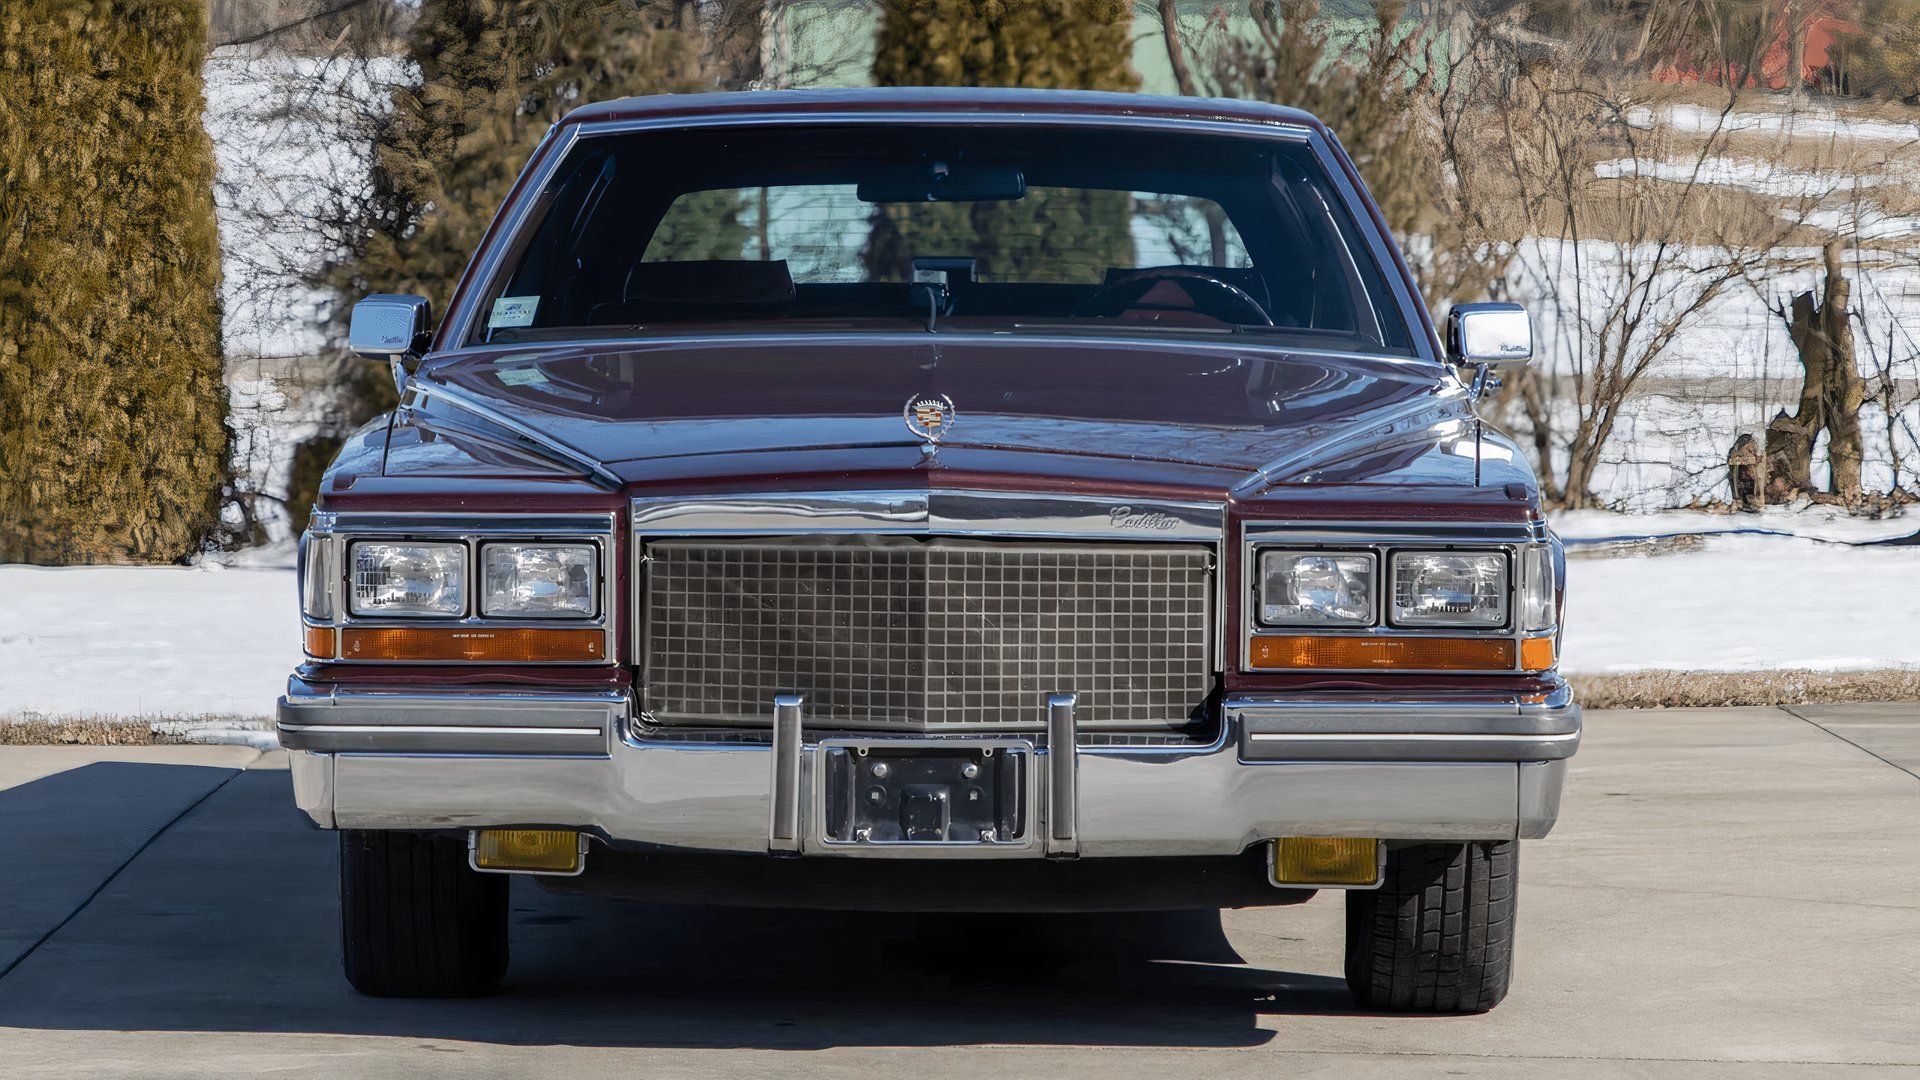 V8-6-4 engine powered Cadillac Fleetwood Brougham D'Elegance from 1981